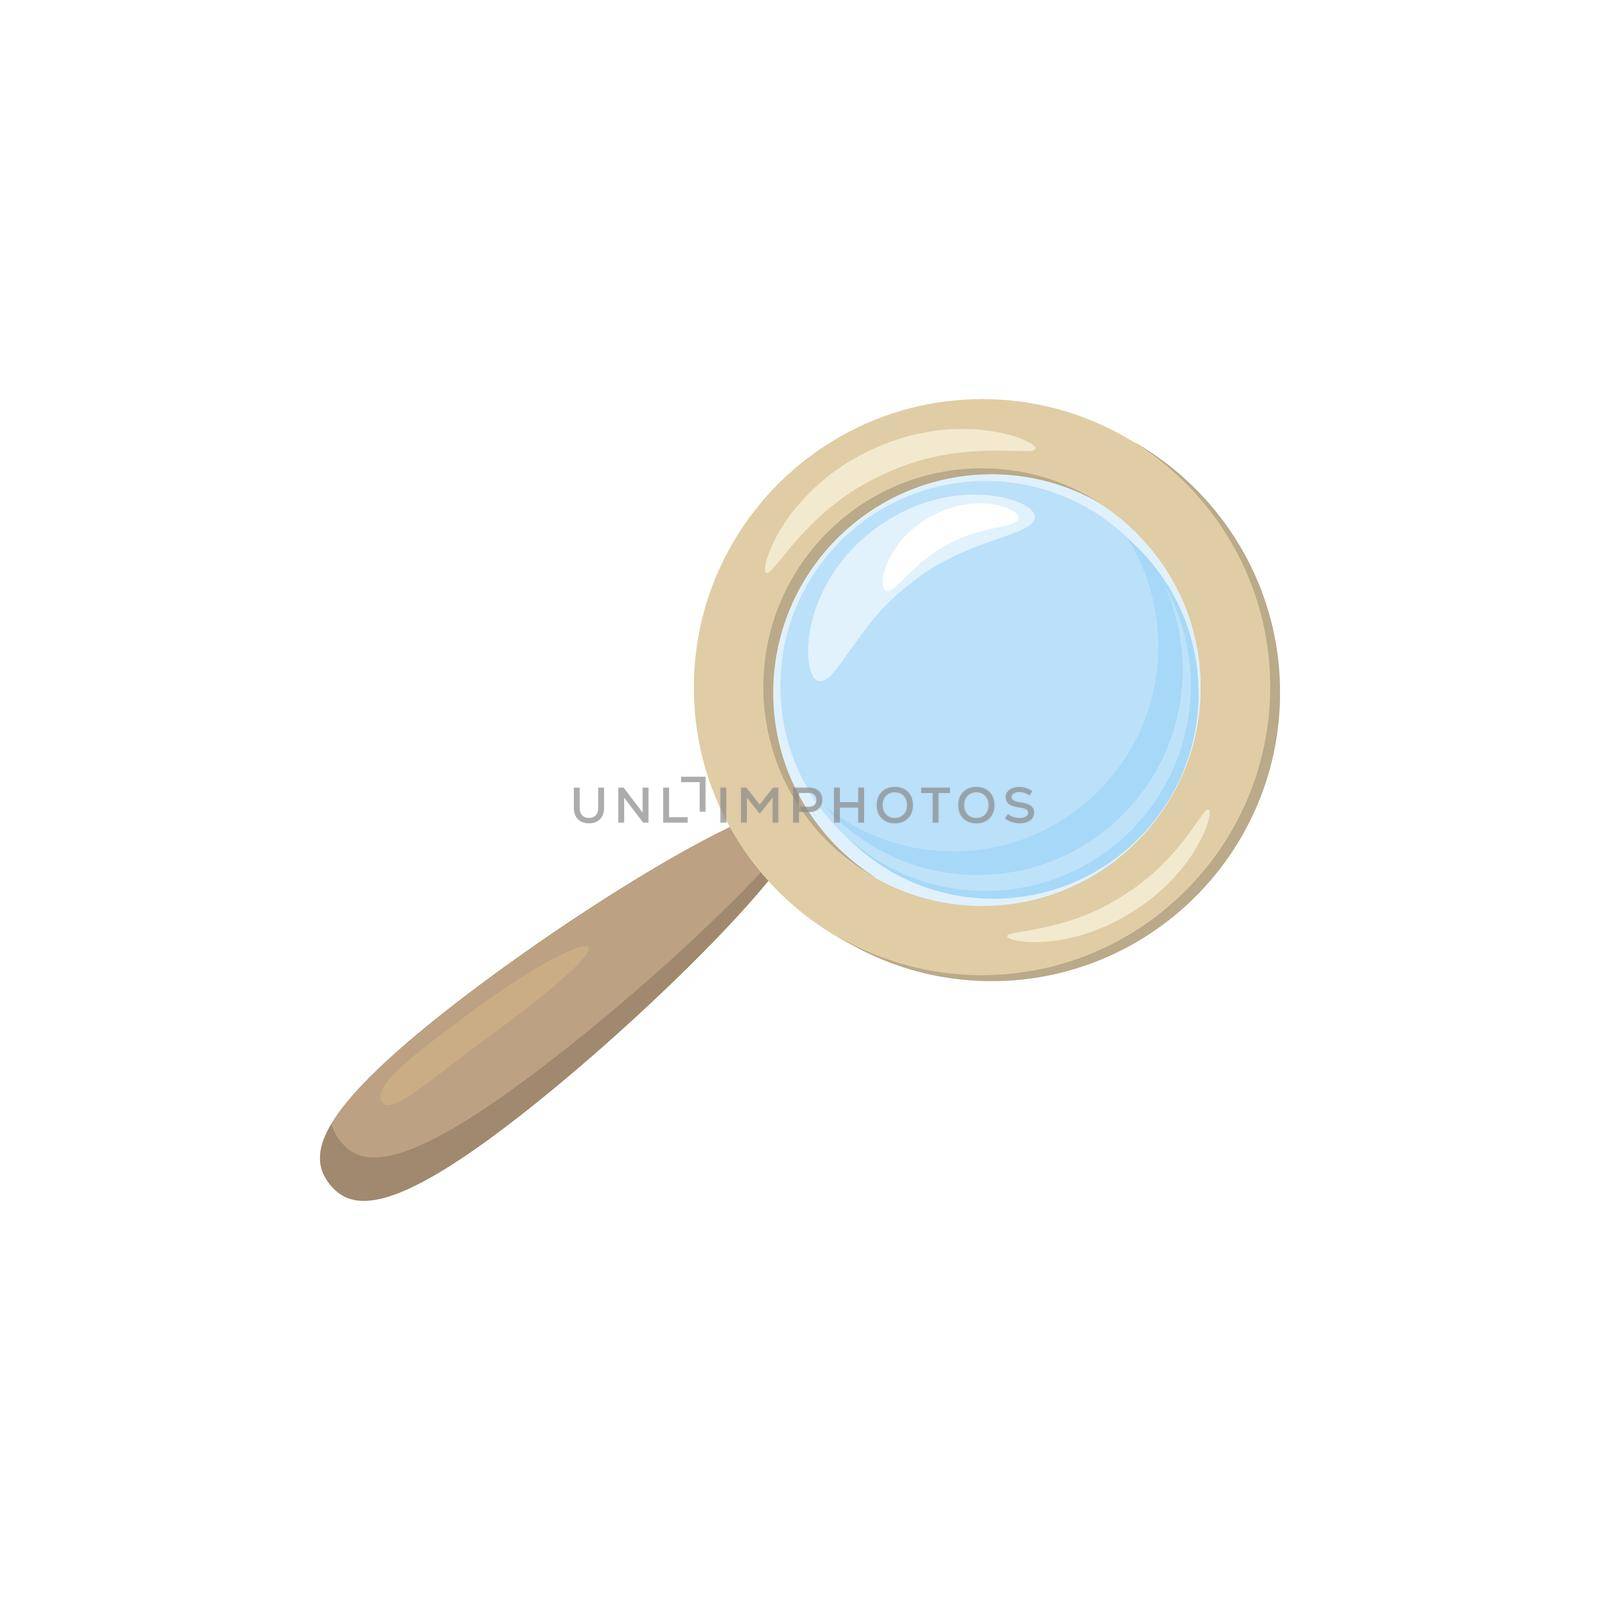 Magnify icon in cartoon style isolated on white background